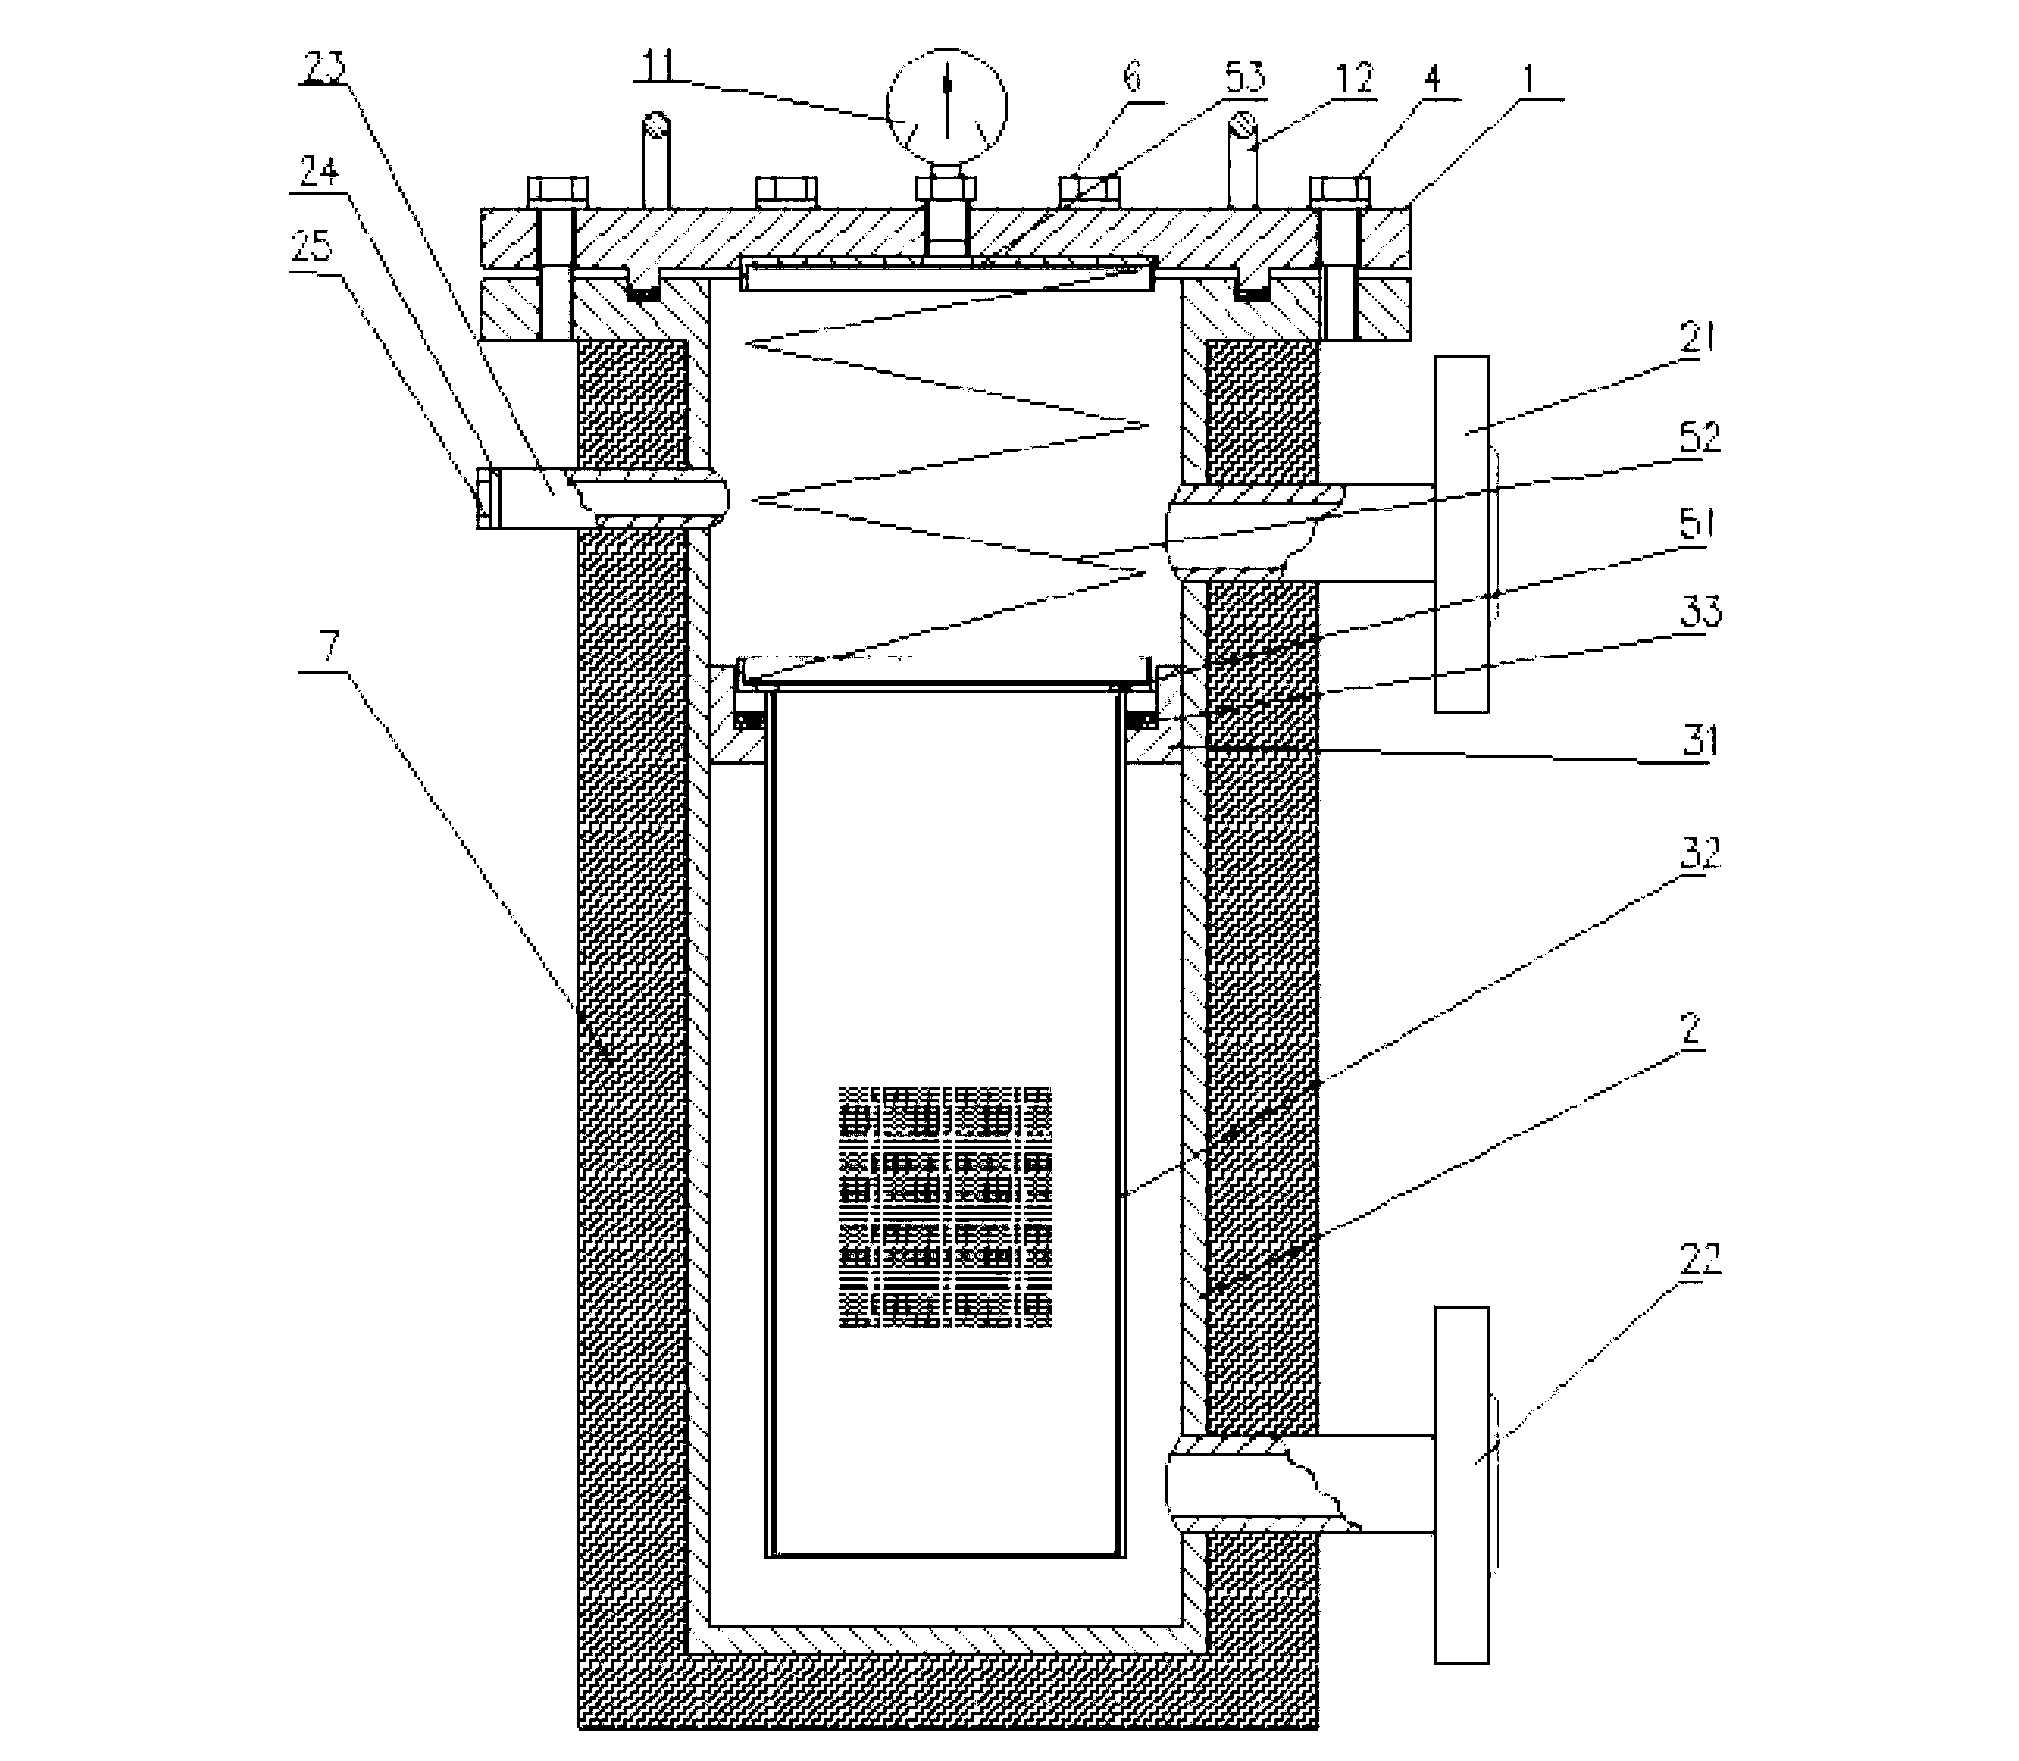 Anti-liquid-channeling high-temperature-resisting filtering device